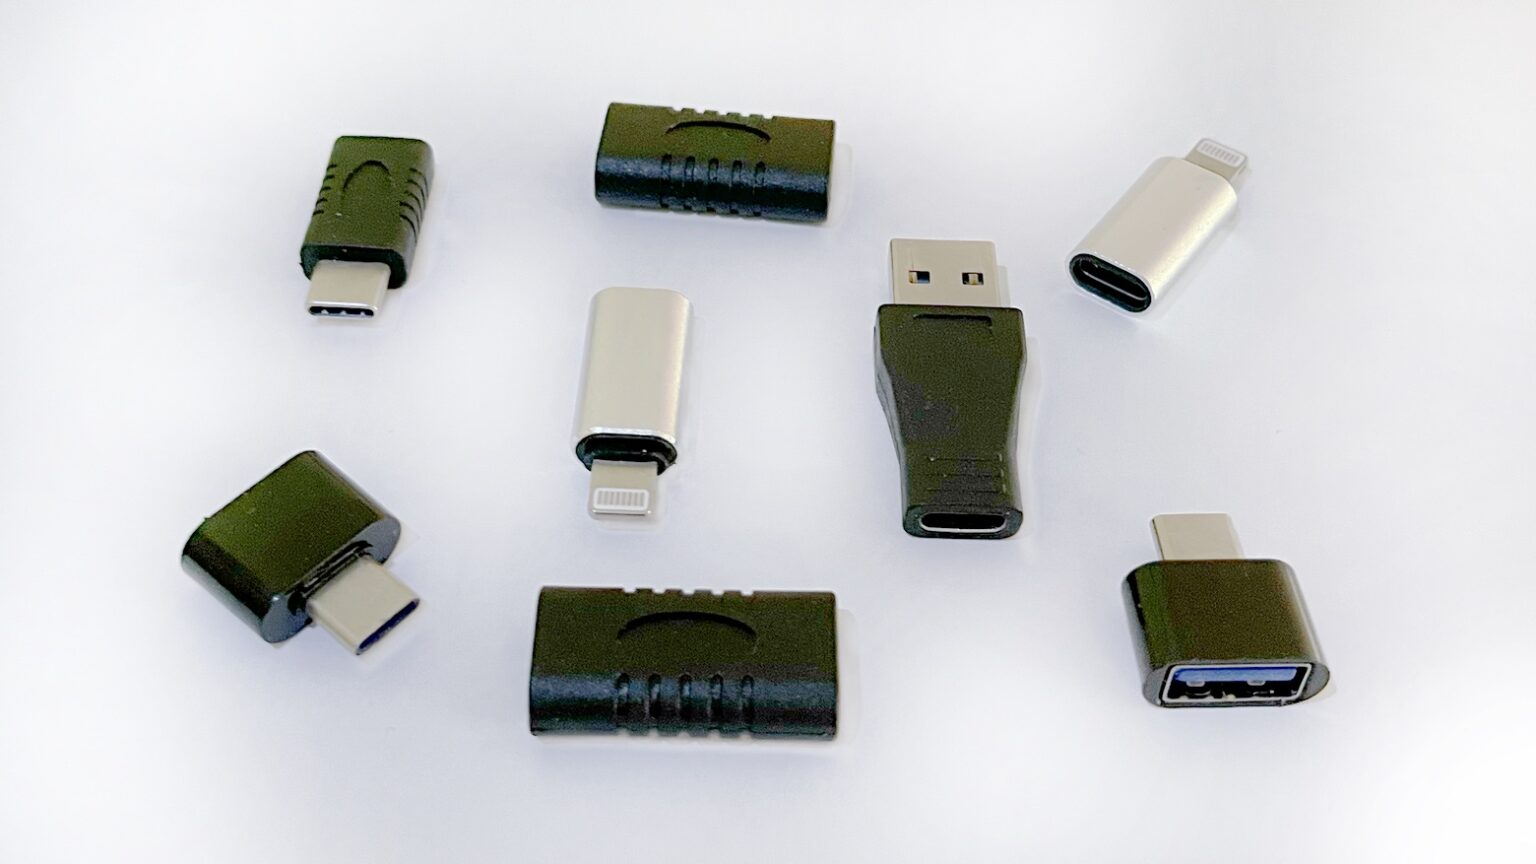 Every MacBook and iPad user needs these 3 adapters